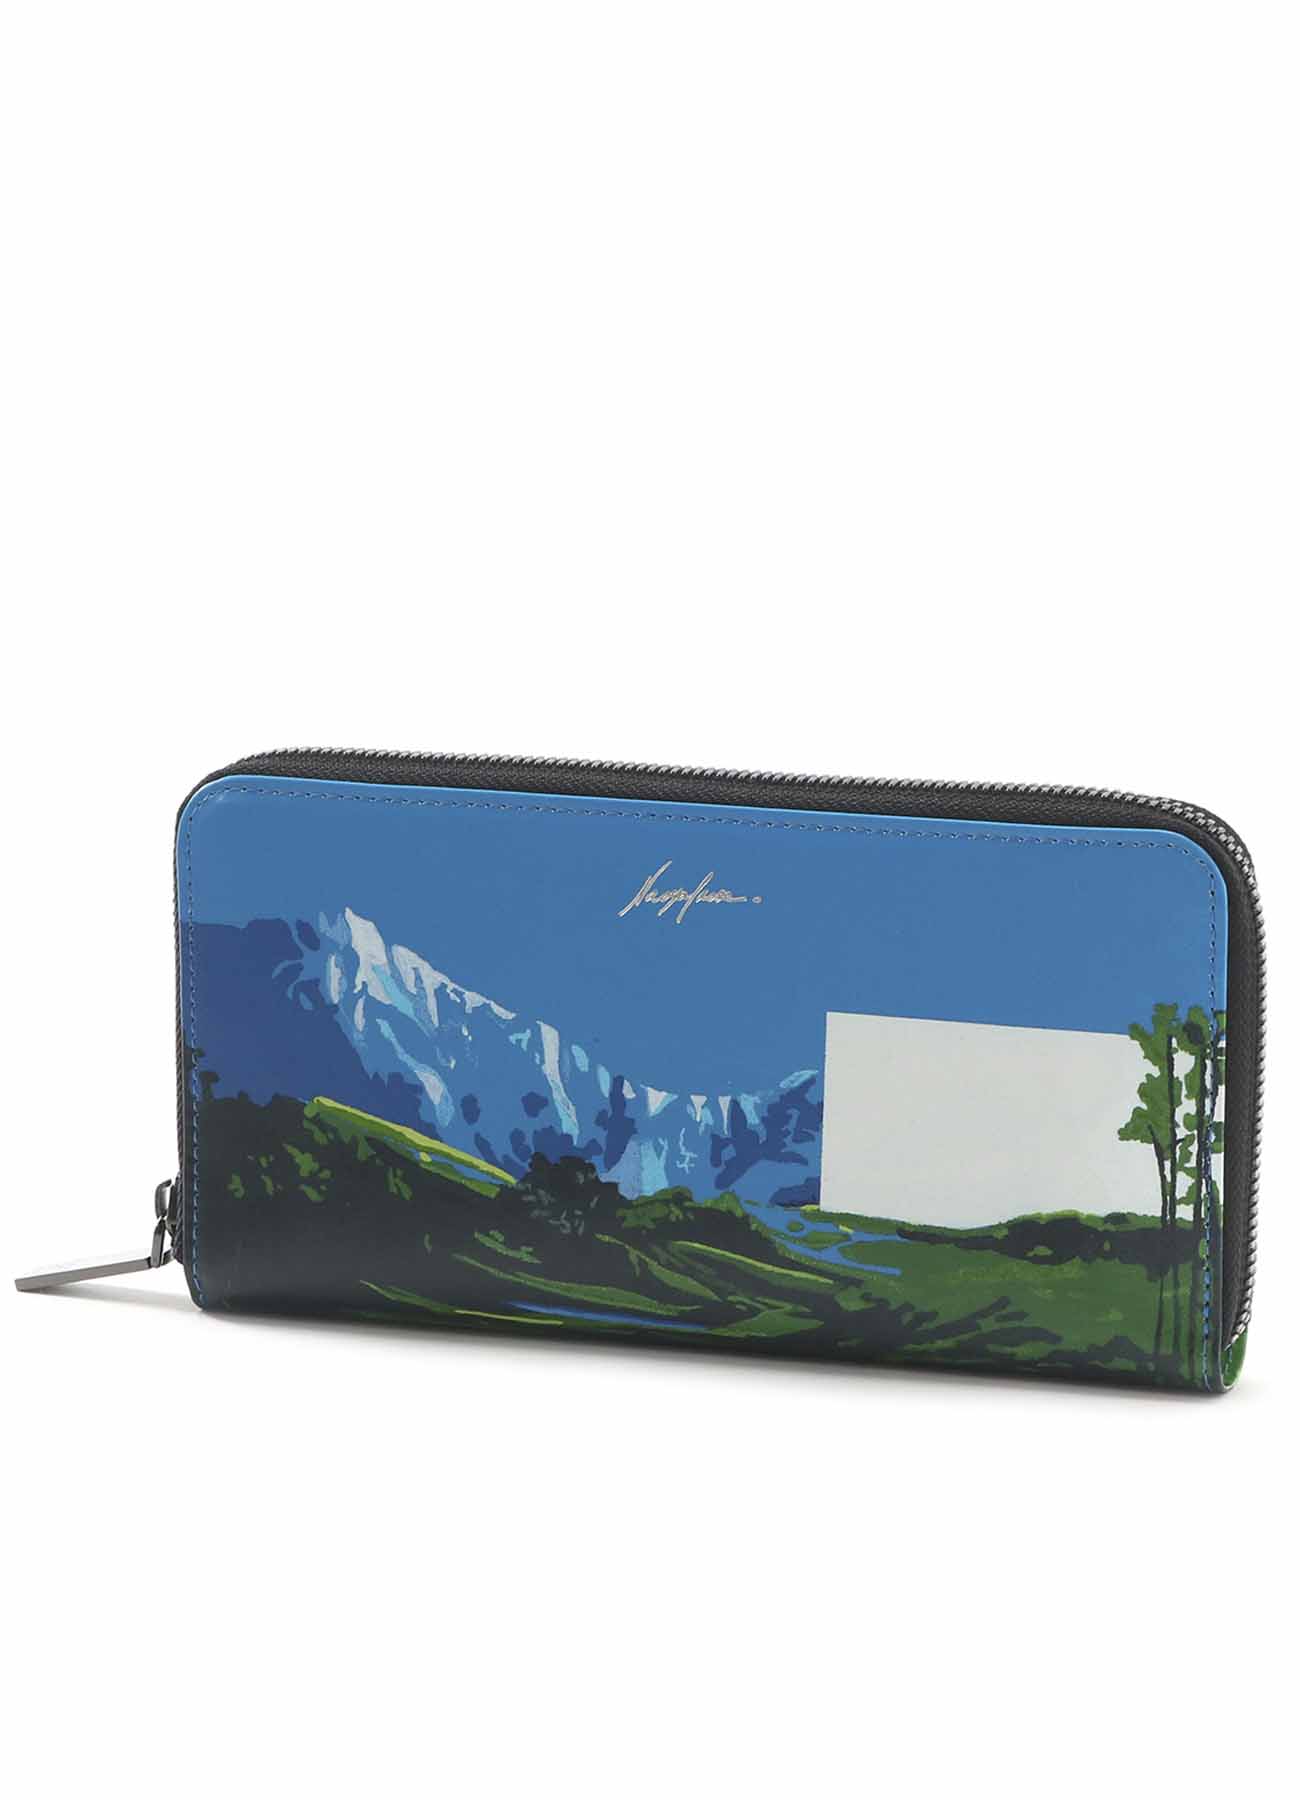 Naoya Inose Collection-Classic wallet - Monolith flat escape